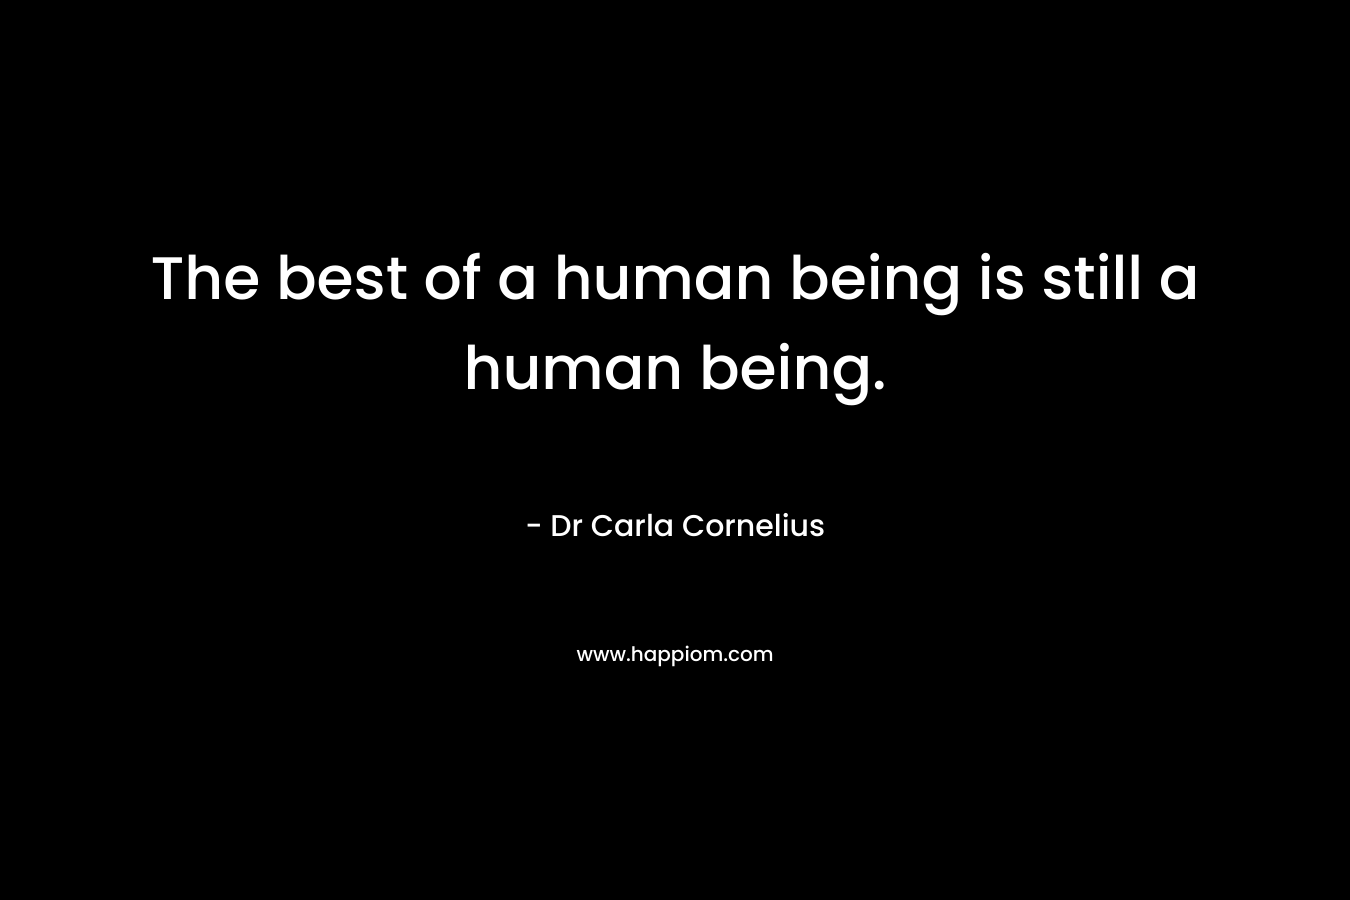 The best of a human being is still a human being.